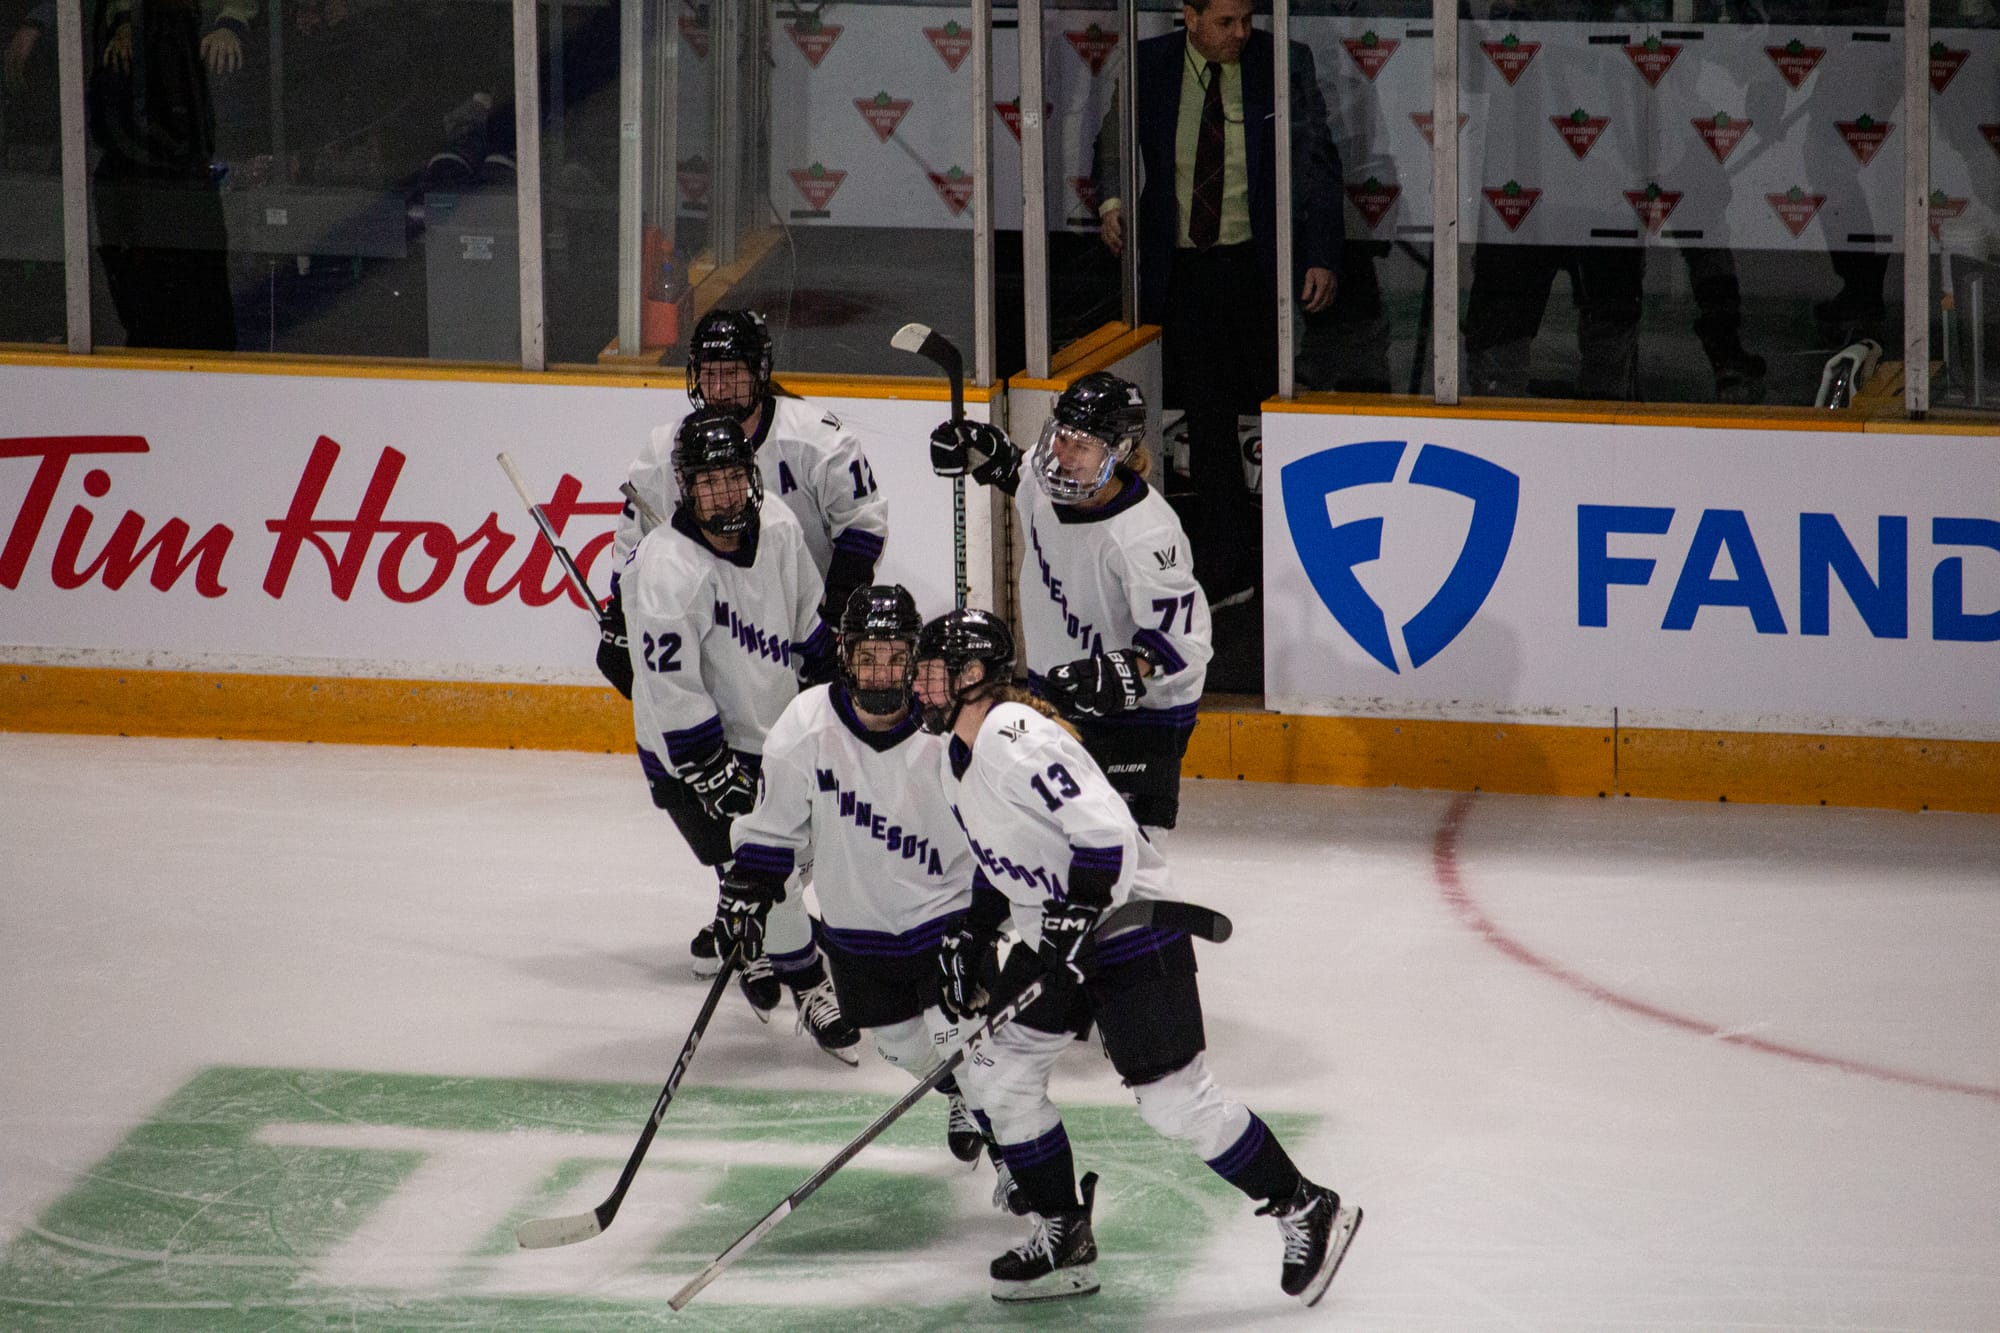 Five PWHL Minnesota players celebrate in front of the penalty box